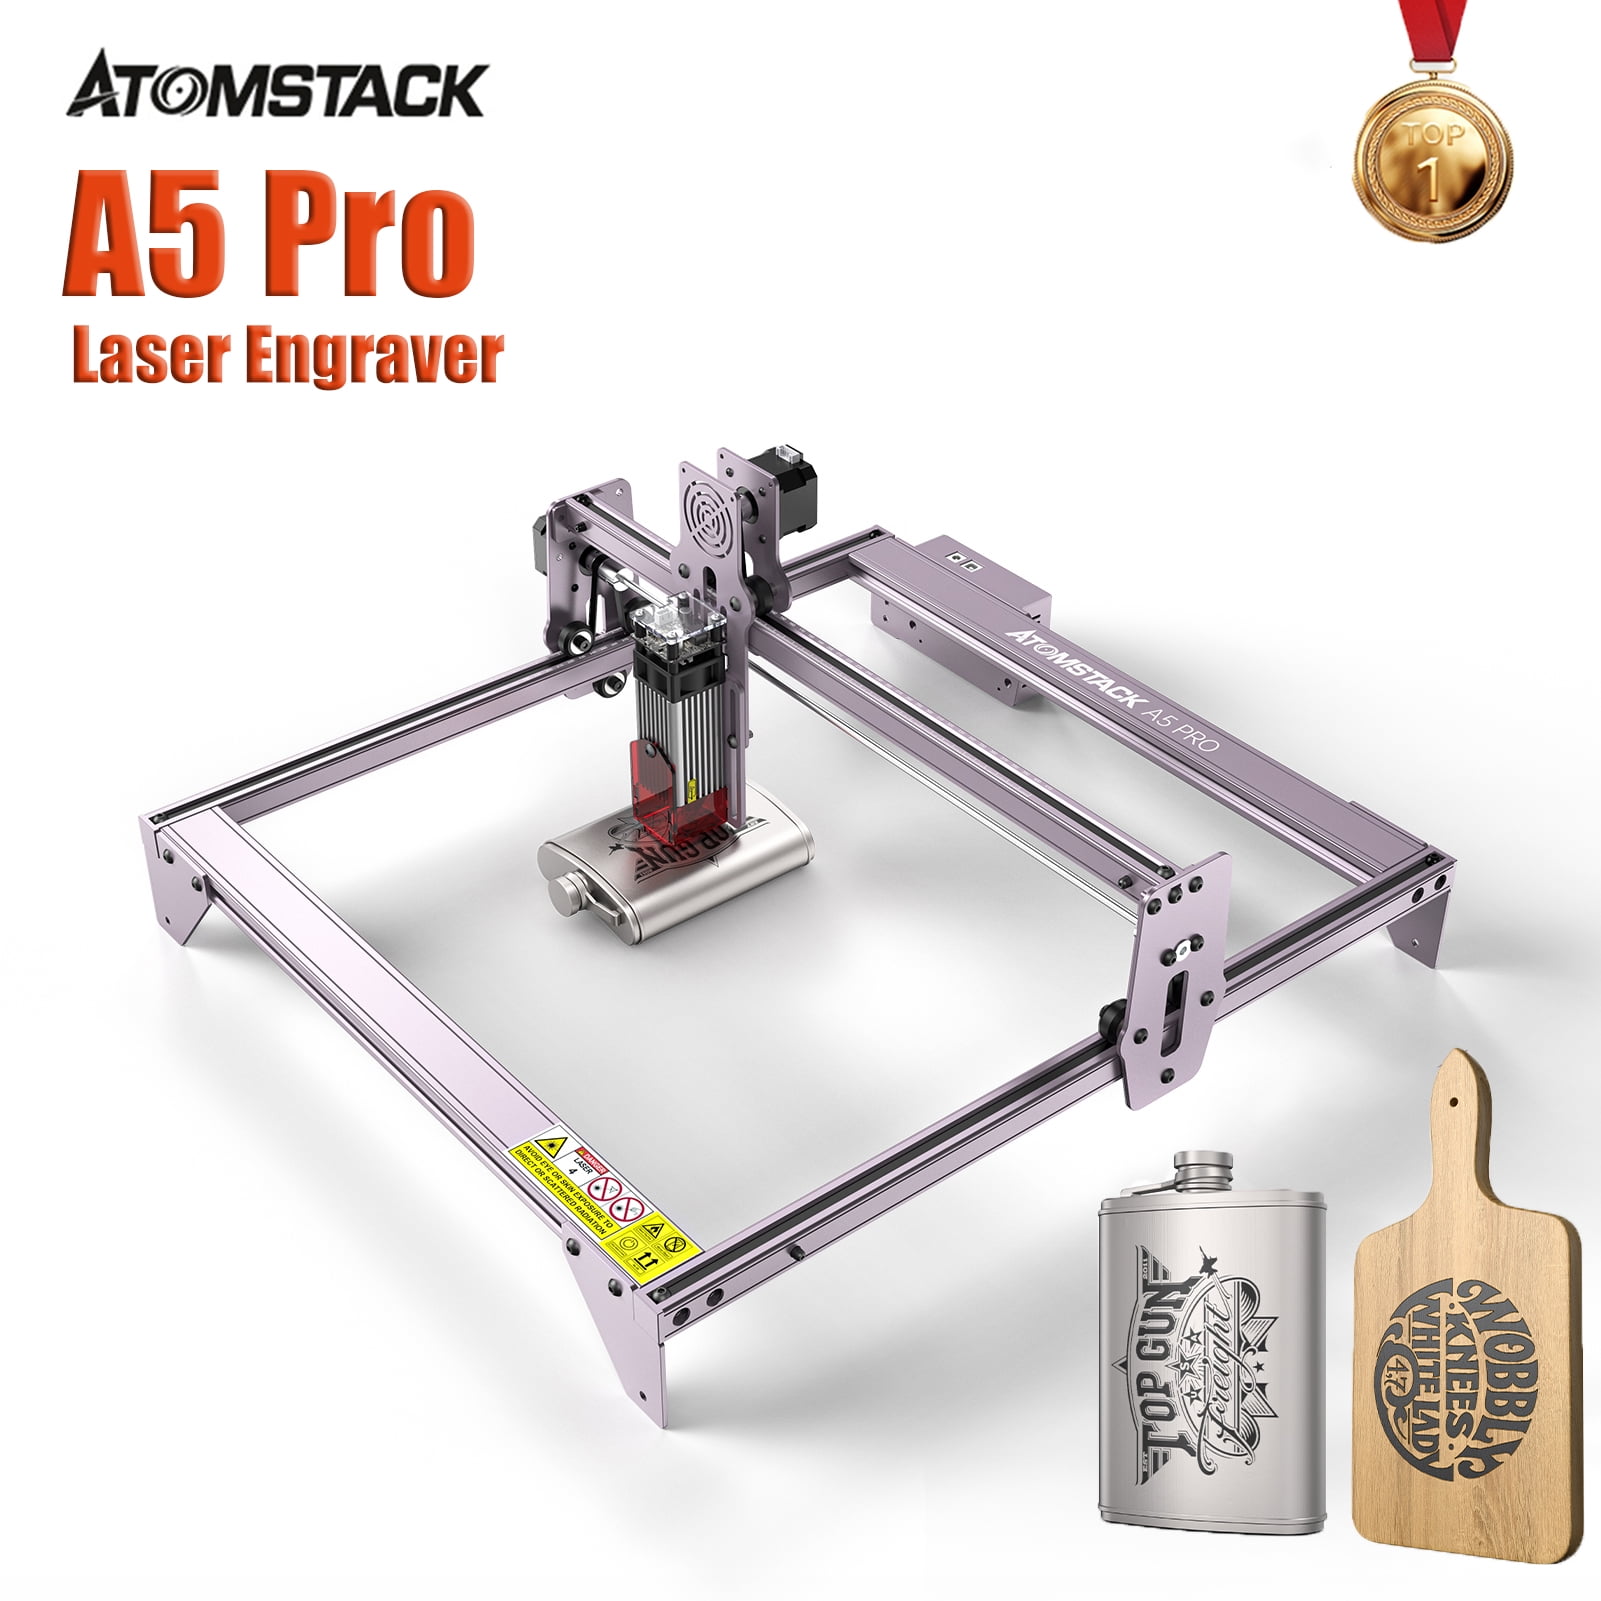 ATOMSTACK S30 Pro Powerful 160W Laser Engraving Cutting Machine Diode 33W  Output Metal Engraver Built in Air Assist APP Control